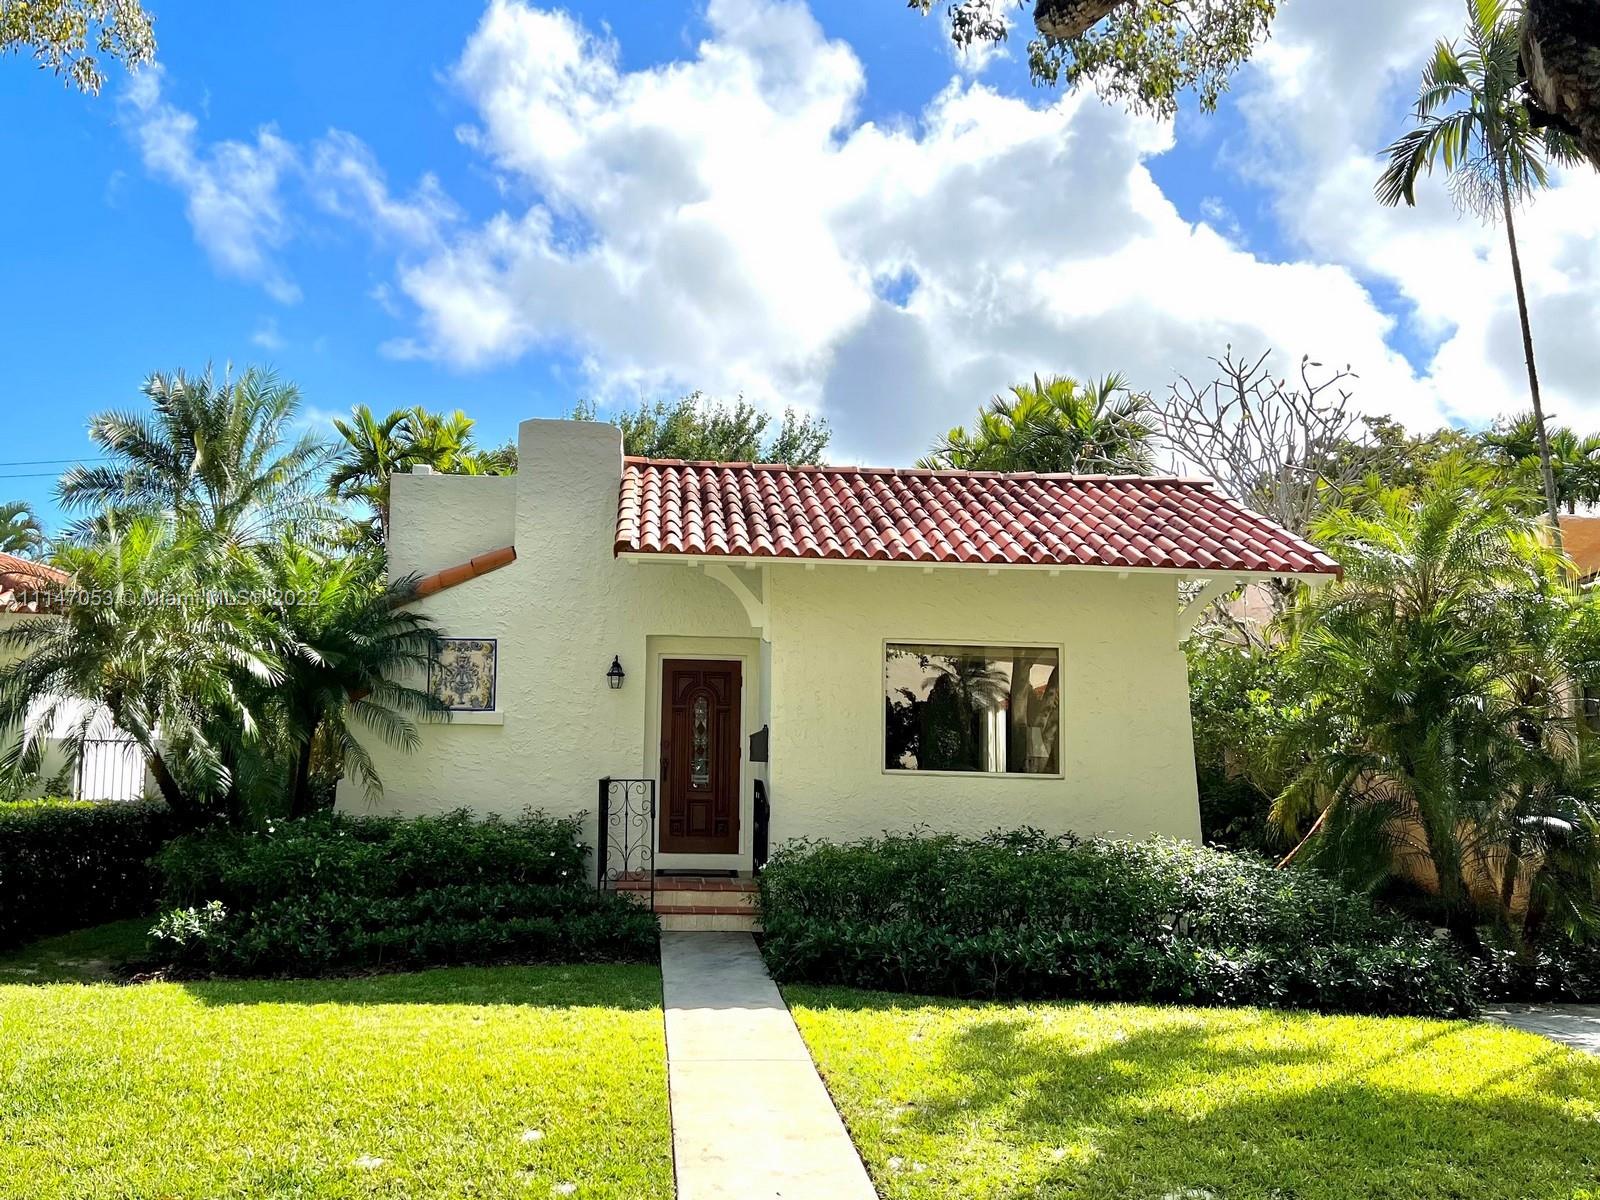 Historic home located steps from Granada Golf course, Biltmore Hotel, Salvadore Tennis Park, and Coral Gables Country Club on one of the most beautiful tree lined streets in Coral Gables. This home was renovated to perfection by current owner. The floor plan is very open, featuring a spacious living room, dining area, plus library w/designer built ins. The kitchen includes panel ready and fully integrated top of the line appliances with green tea granite countertops. The master bedroom is larger than most and includes a walk in closet uncommon in unique homes. The master bath is luxurious with shower and double sinks. Hurricane impact windows, doors, new roof, new a/c. Wired sound system w/Sonos as well as Bang and Olafson speakers. Professionally landscaped w/very private spacious yard.